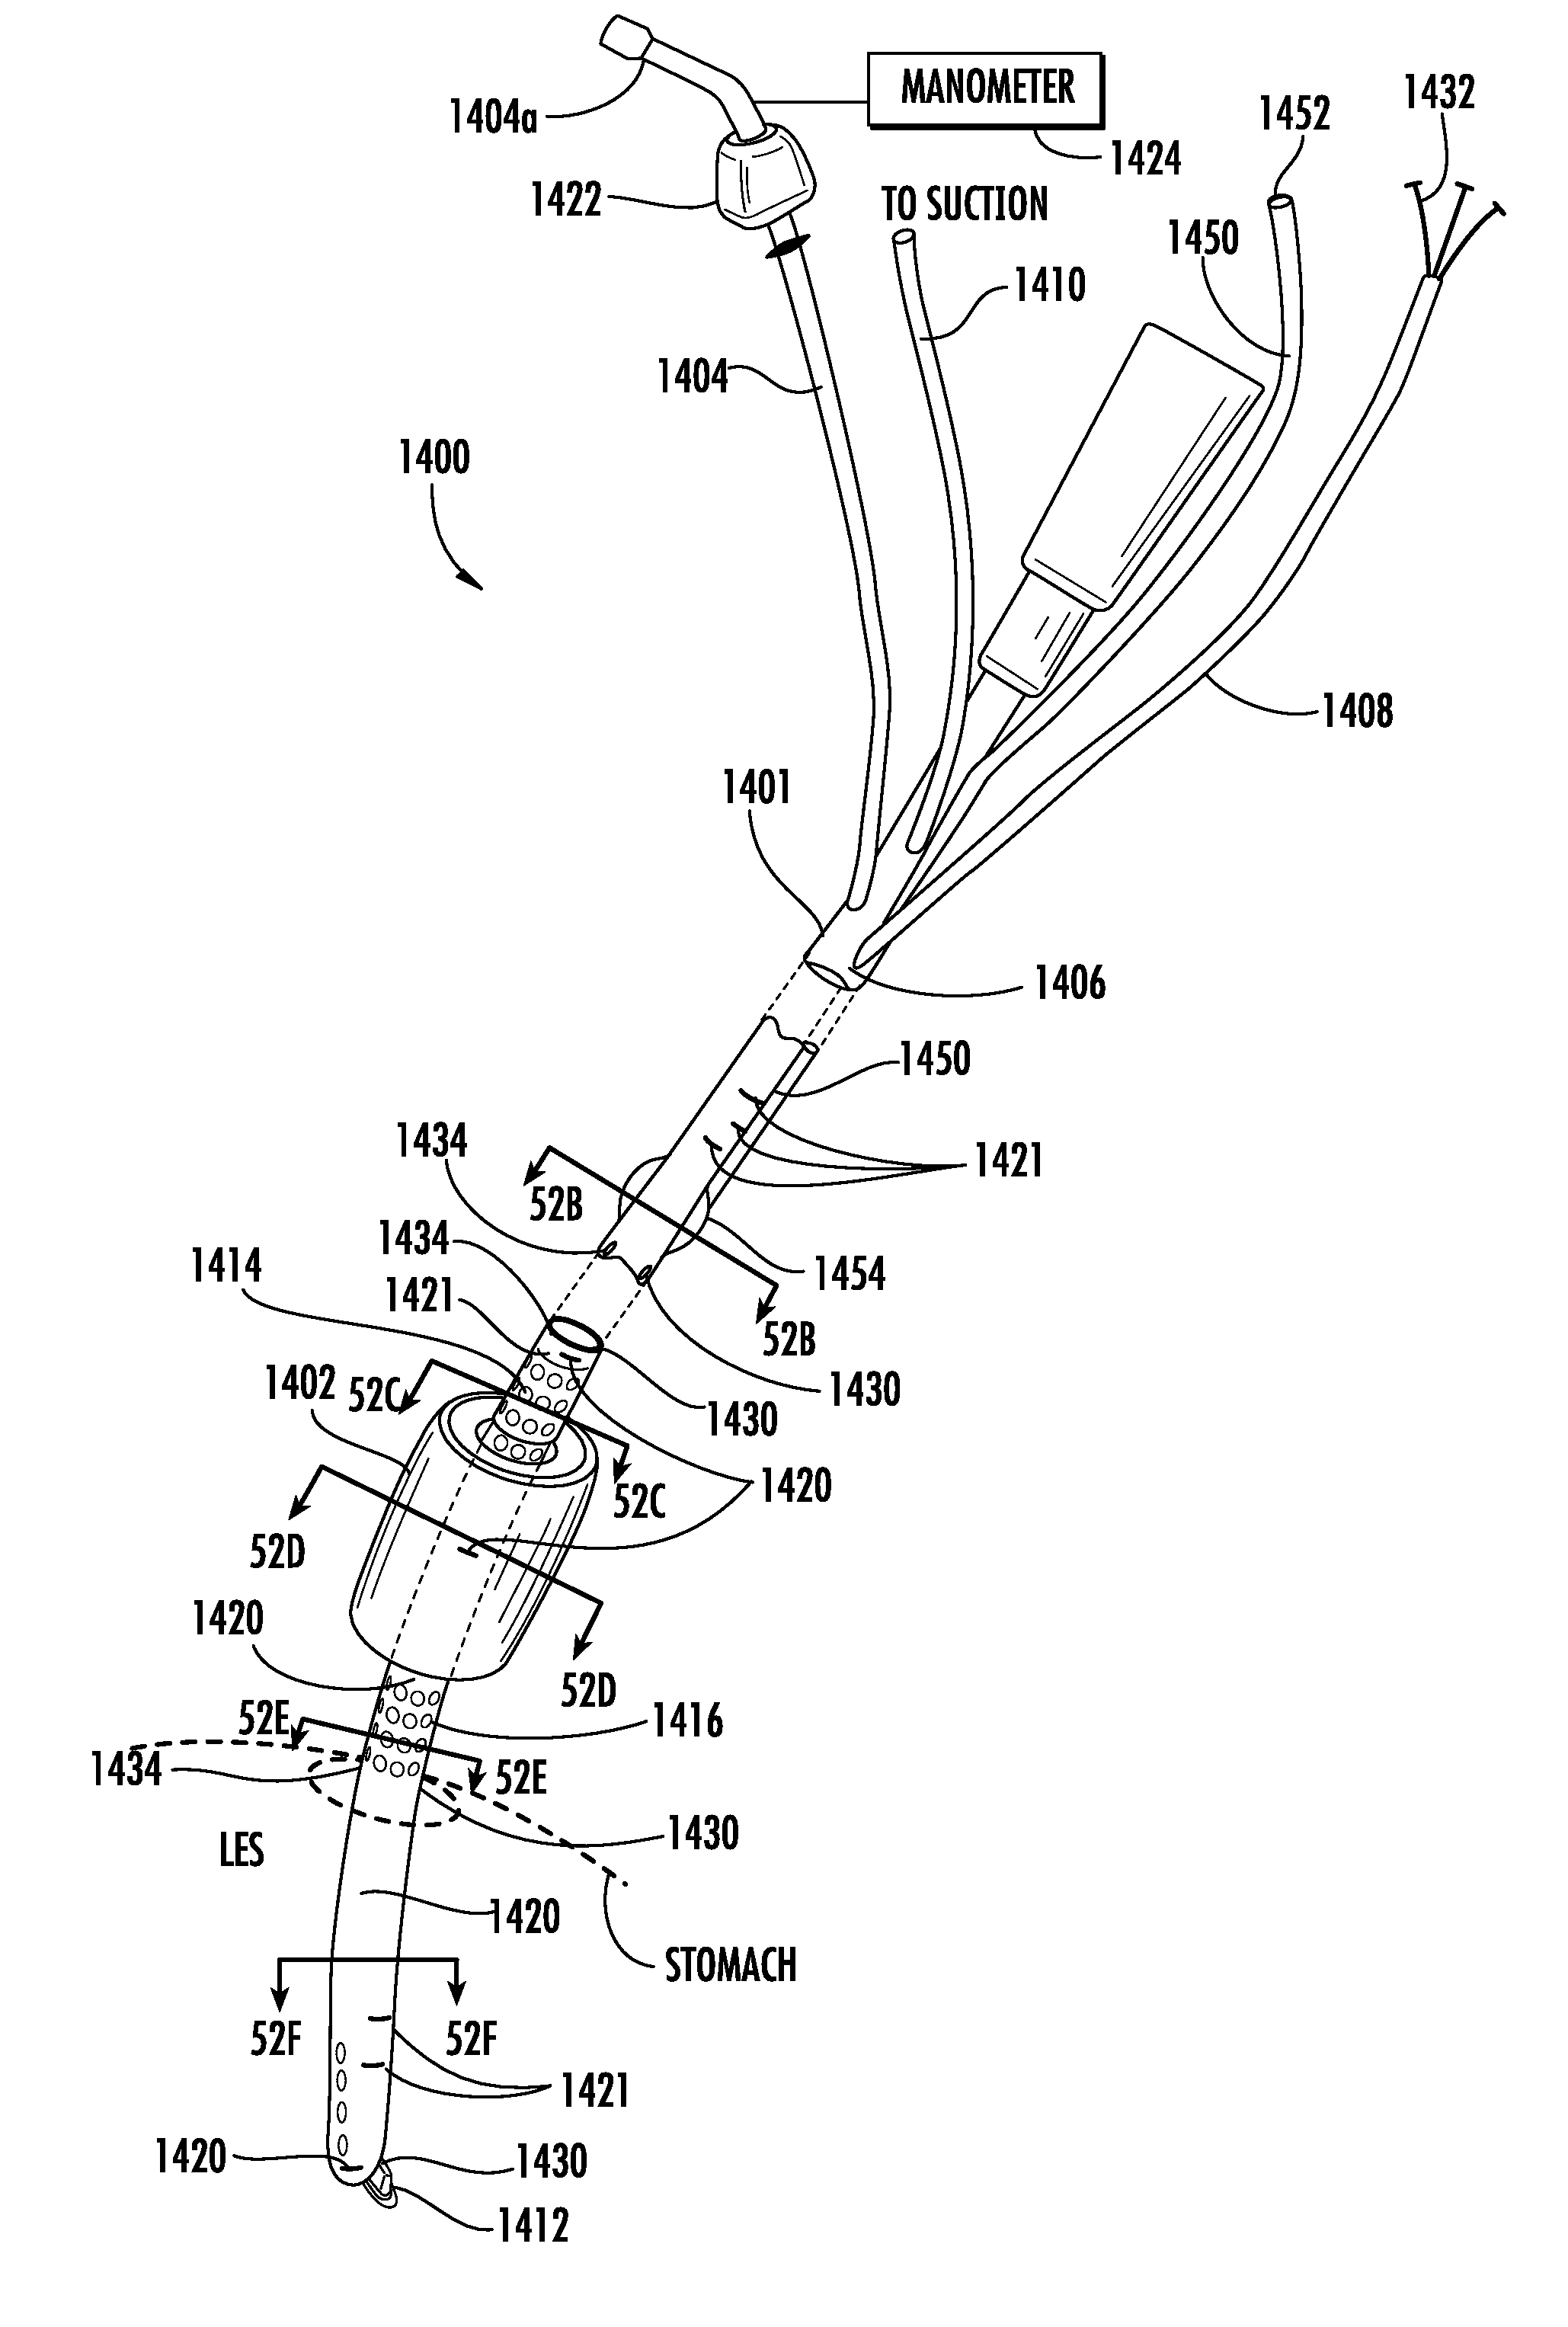 Oral-esophageal-gastric device with esophageal cuff to reduce gastric reflux and/or emesis